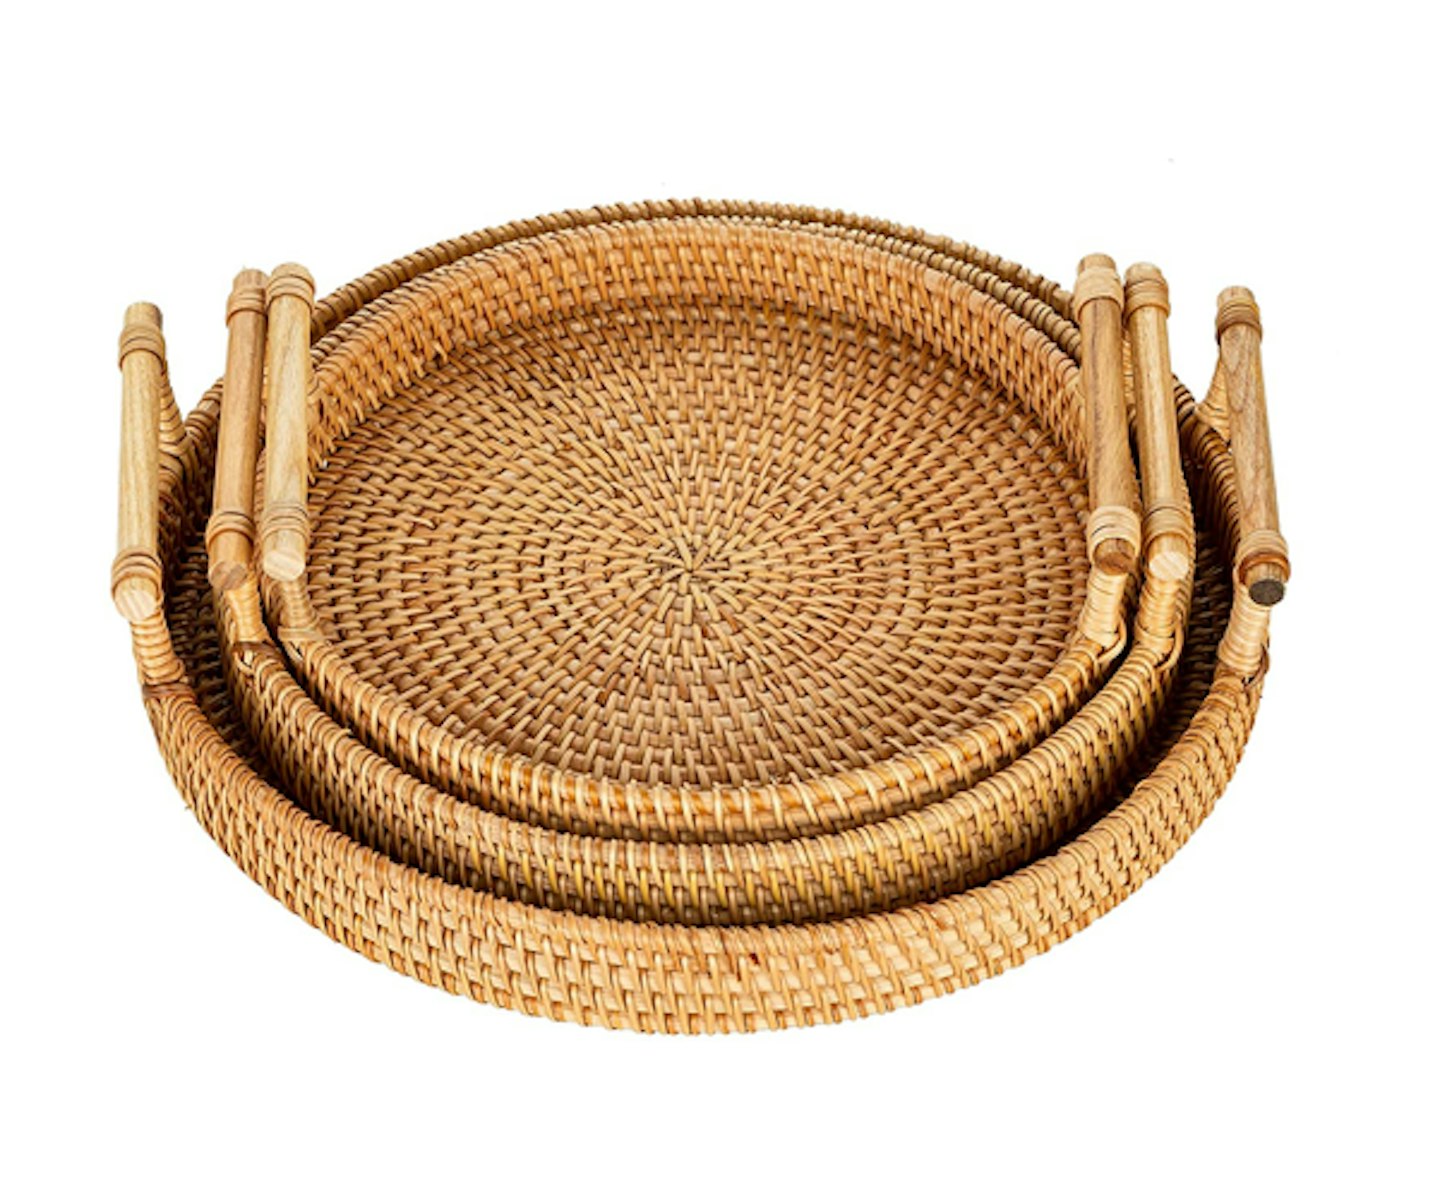 Sziqiqi Rattan Serving Tray with Handles